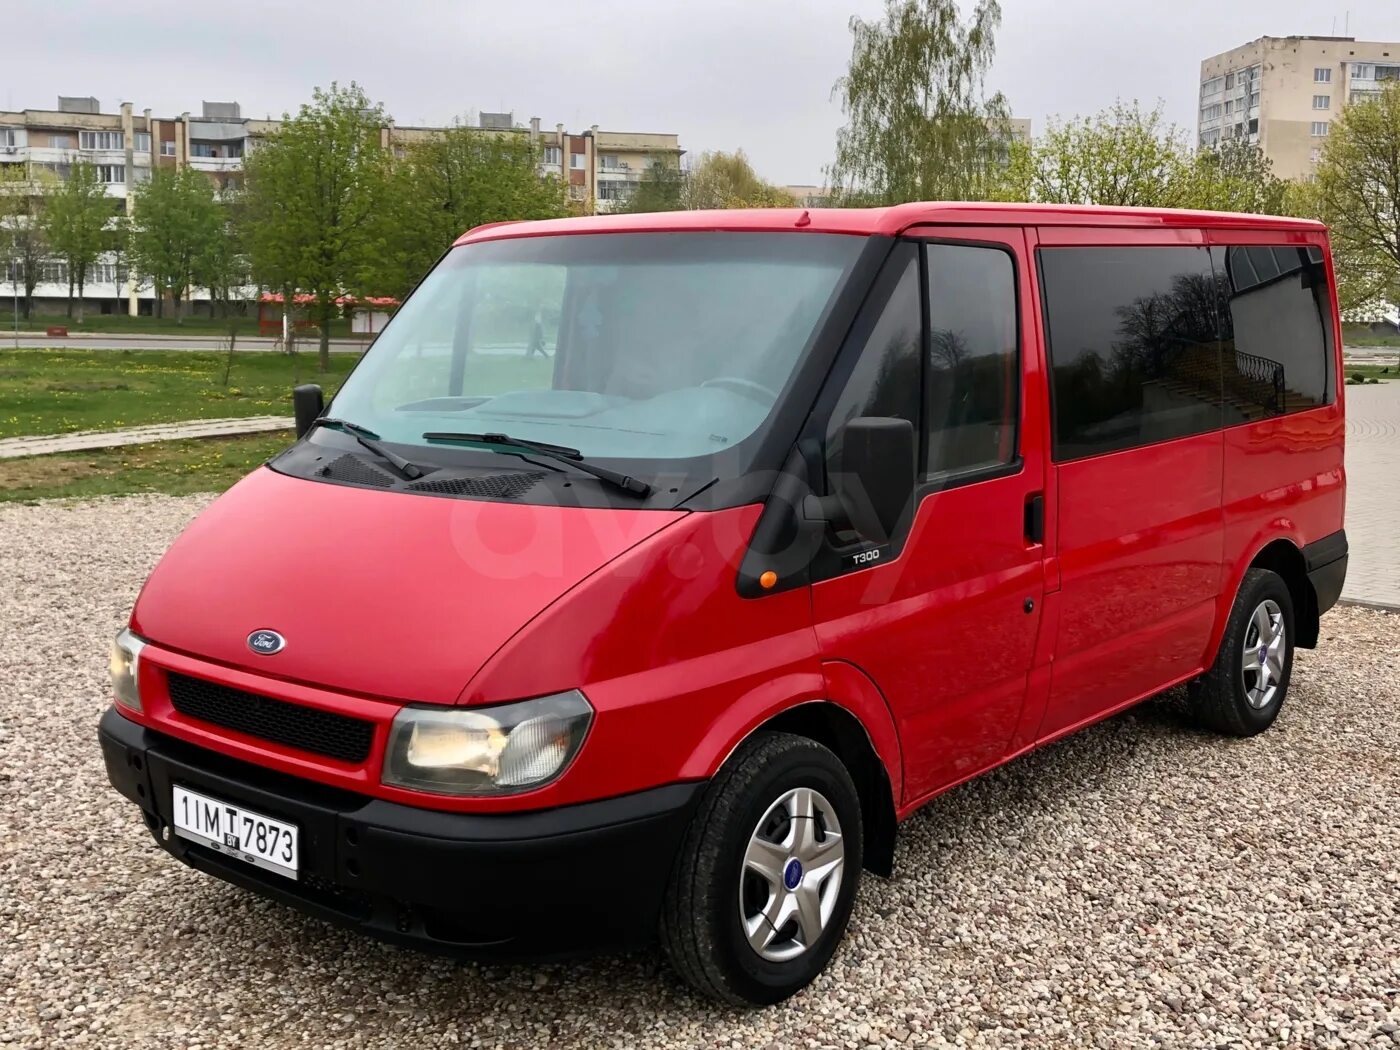 Ford Transit 2002. Форд Транзит 2002г. Форд Транзит 2002г 2л дизель. Форд Транзит 2002 года.